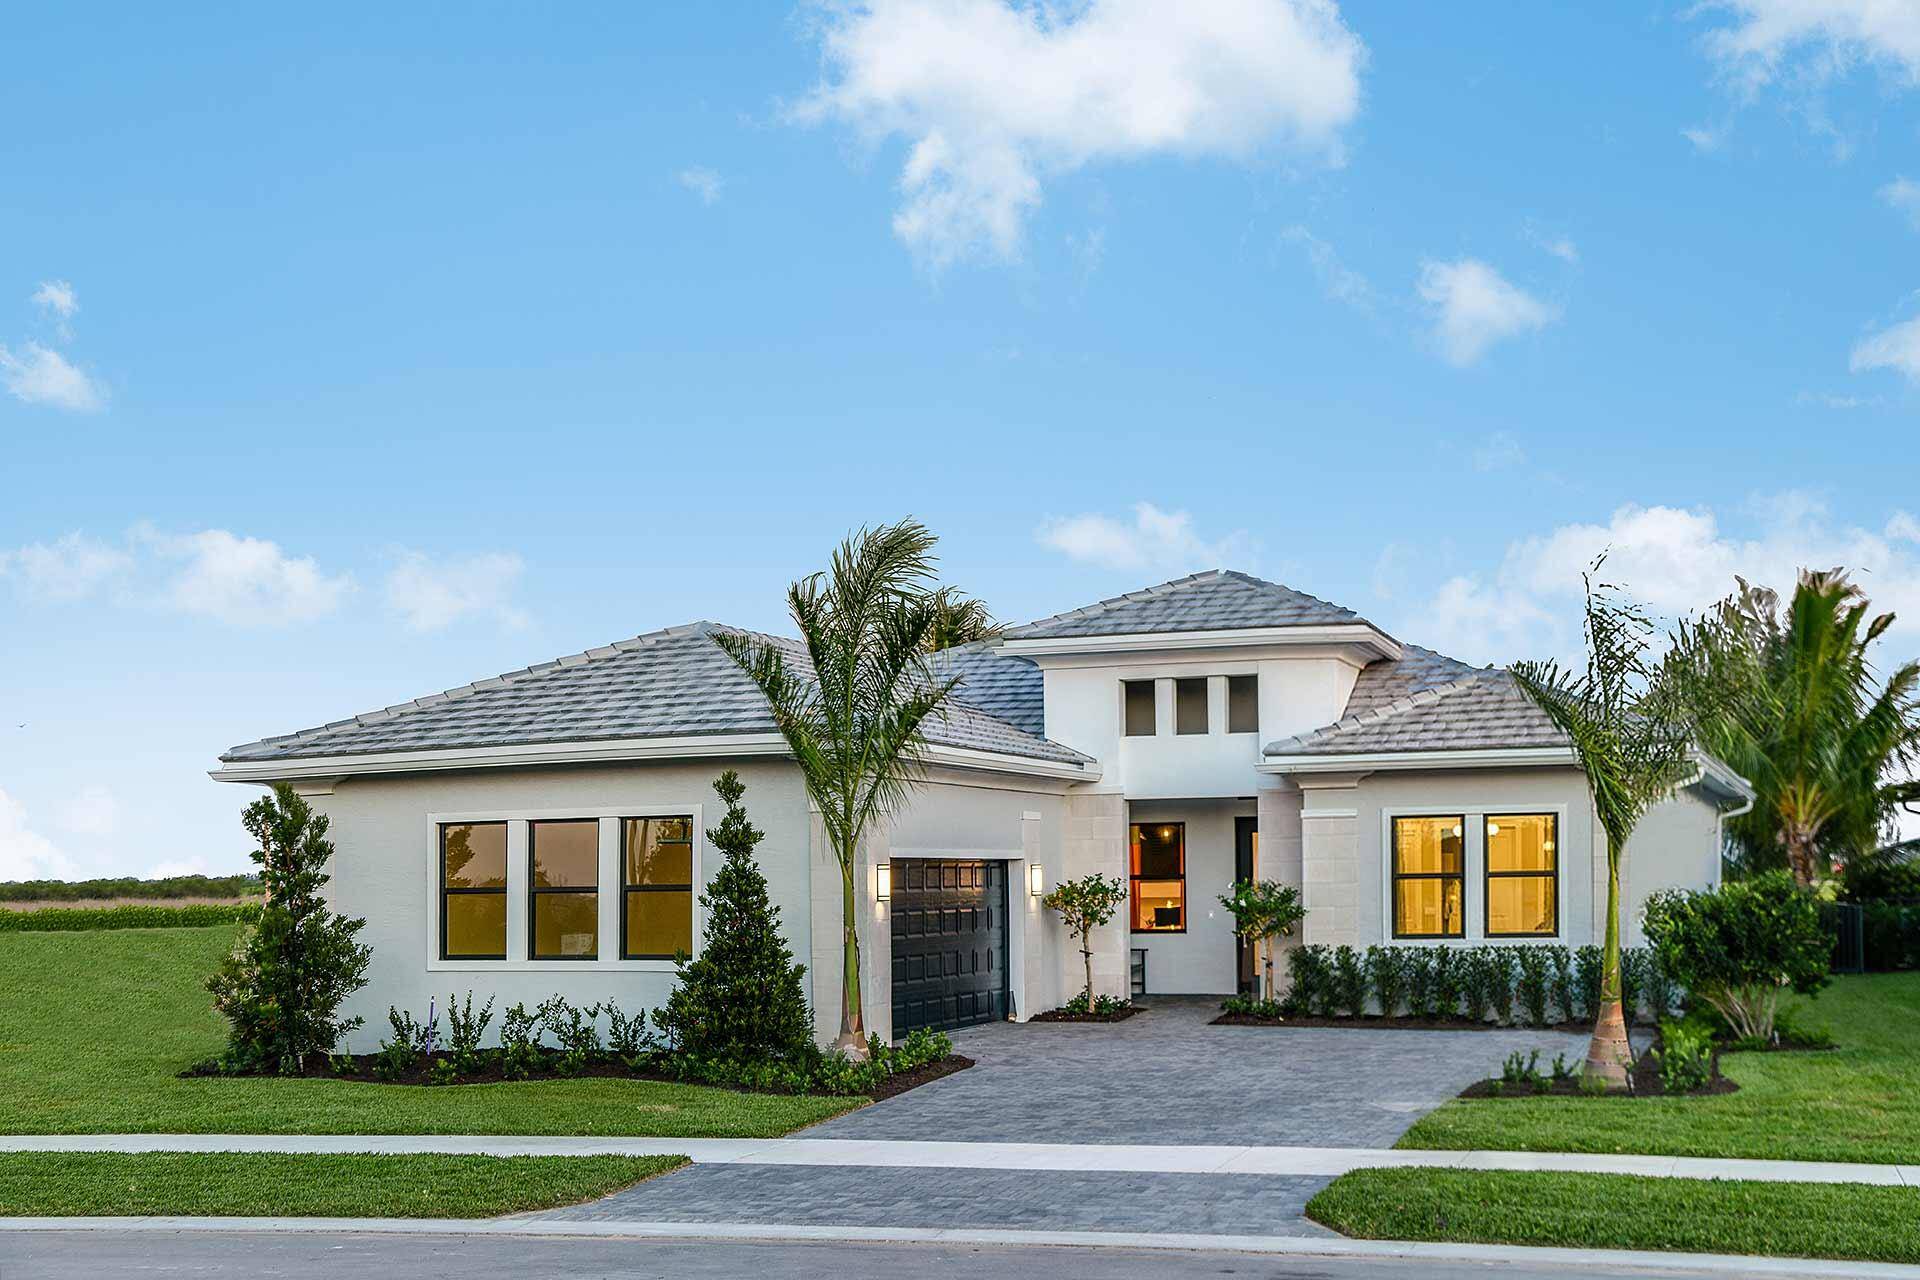 Designer decorated, fully furnished Coastal Florida Design home features 3 Bedroom, a Den, 3 full and 1 half Bath, a Great Room, Pool, and a 2 car Garage.